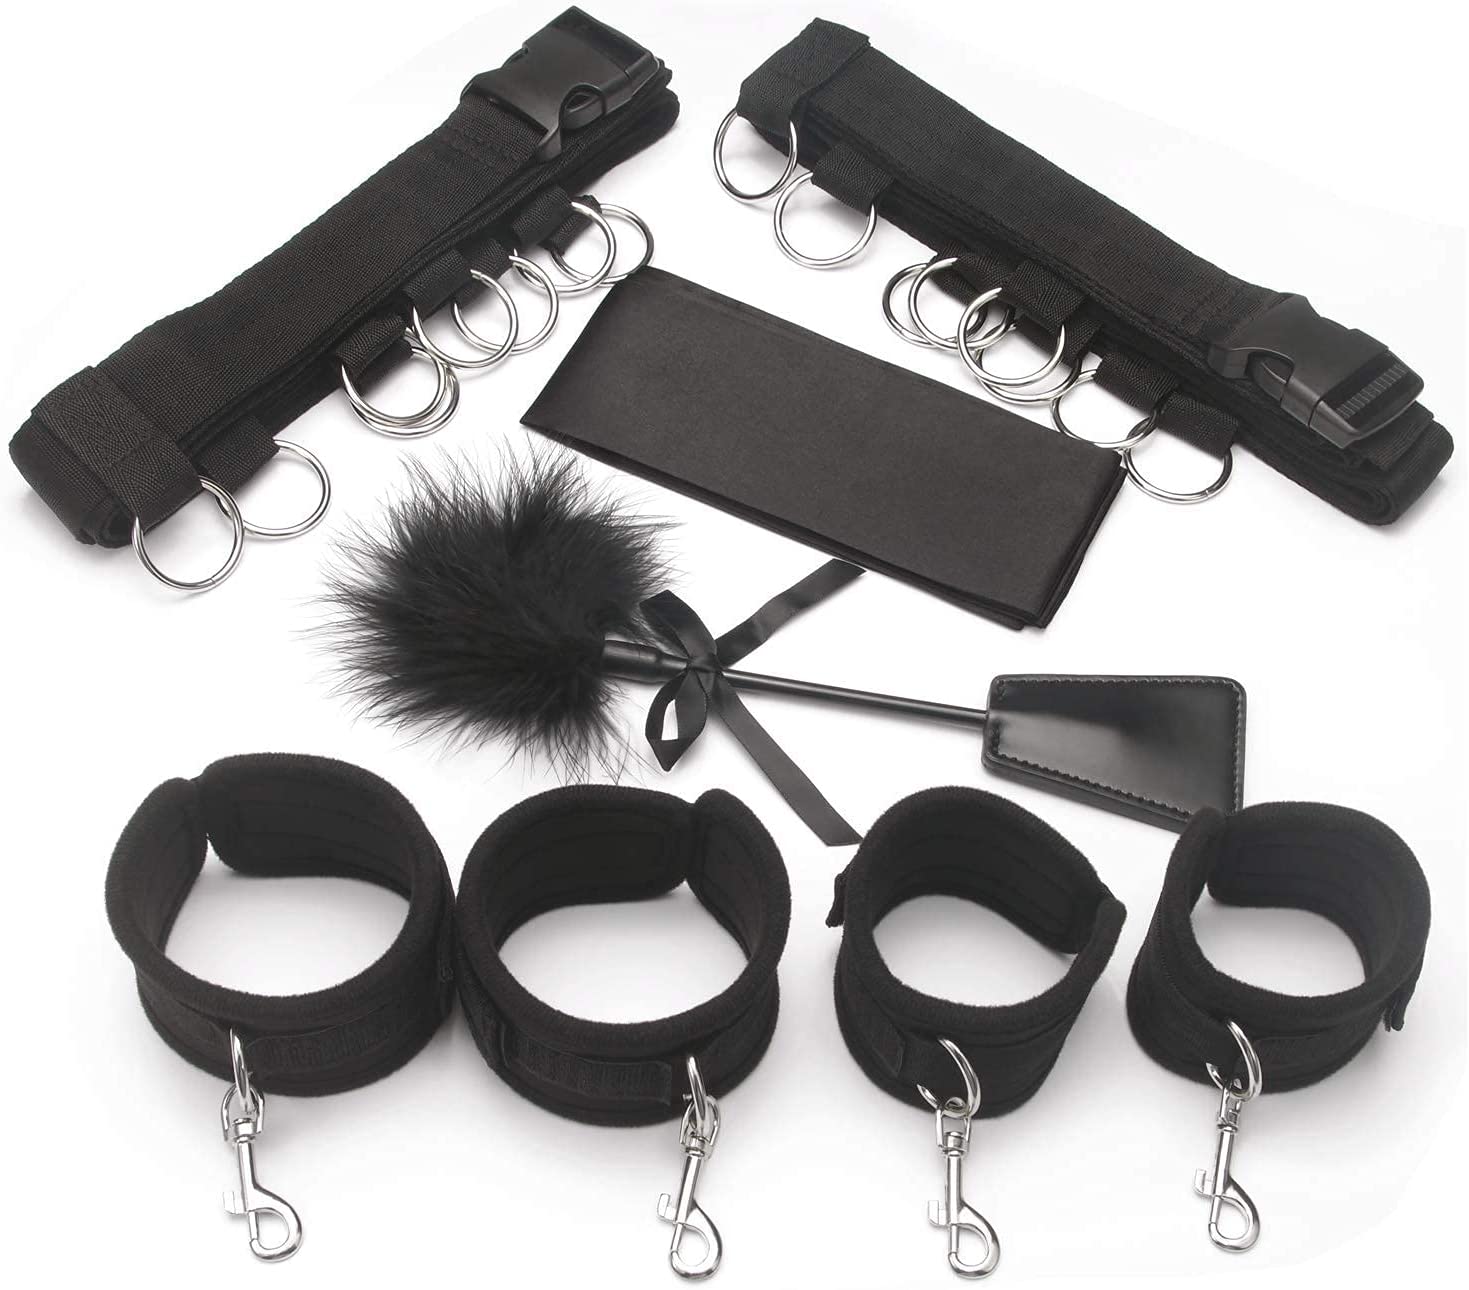 Strict Bed Restraint Kit, Under Mattress Restraint Bondage Set with Wrist Ankle Cuff, BDSM Sex Game Play for Couple, Blindfold & Tickler Included